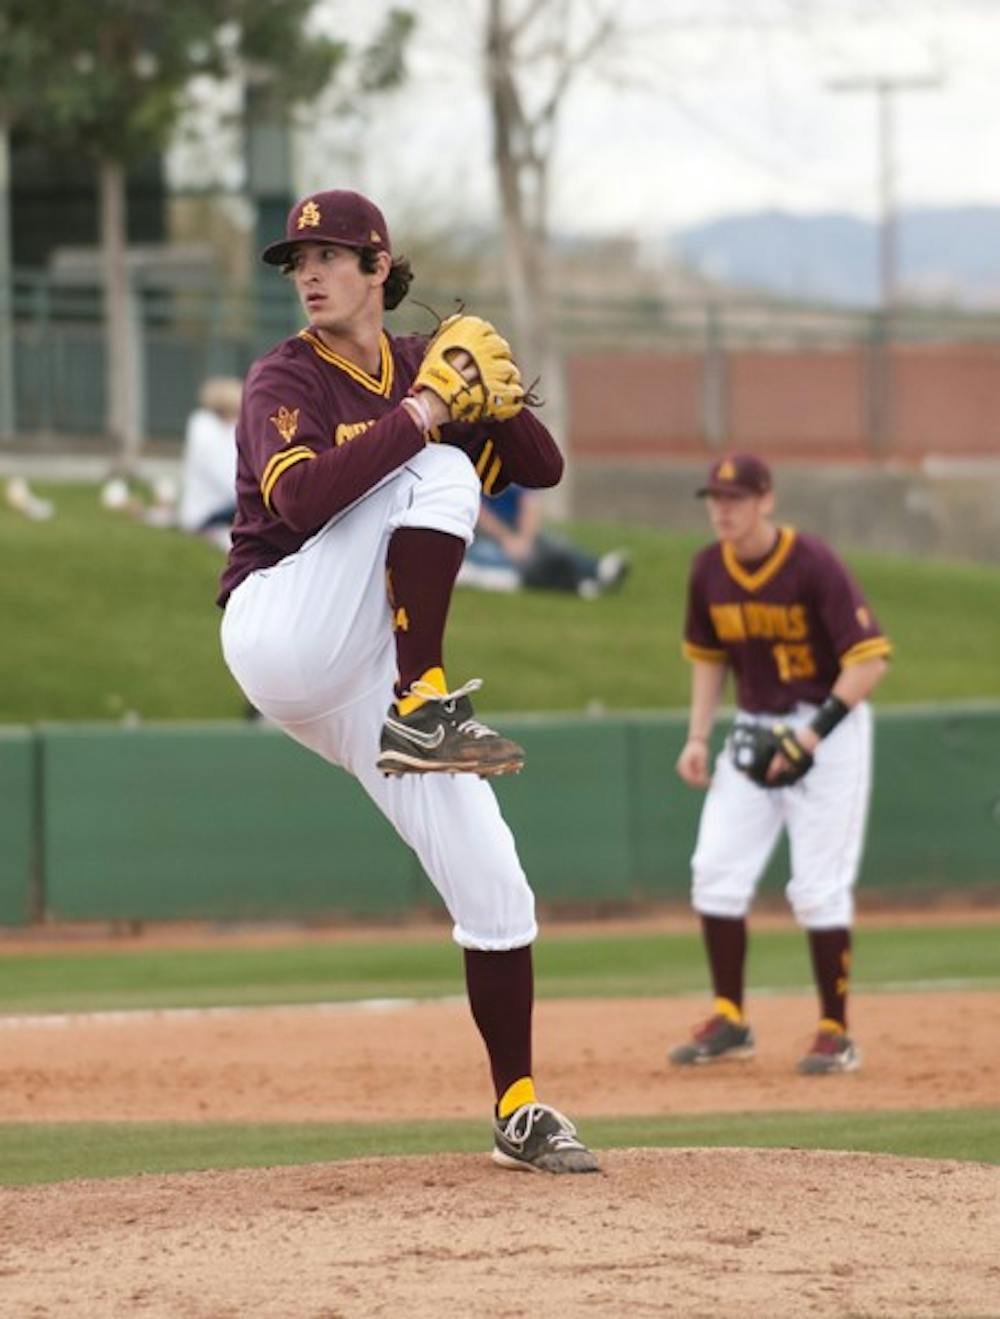 Freshman pitcher Brett Lilek raises his knee during his delivery in the ASU alumni game on Feb. Lilek has proved himself in these early games and might get a start this weekend in the Coca-Cola Classic. (Photo by Molly J. Smith)